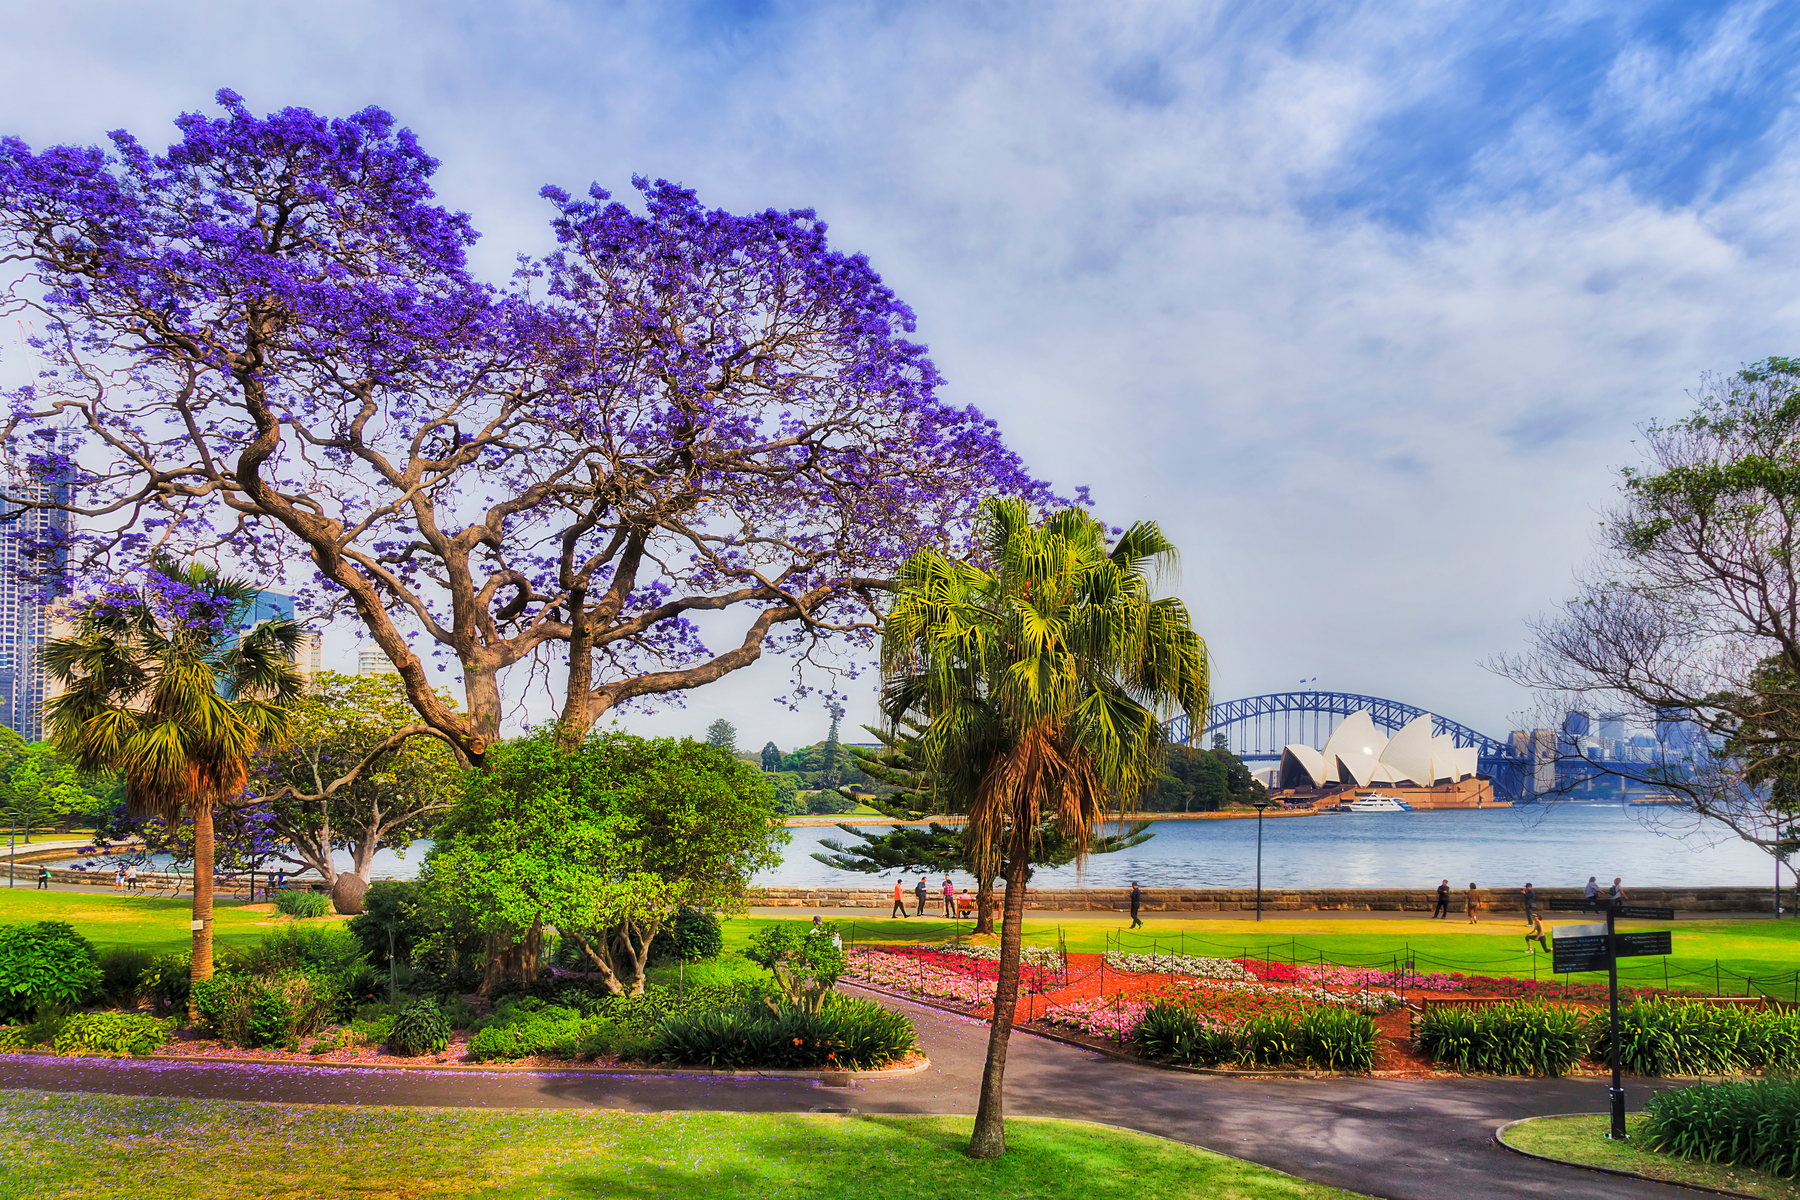 Sydney city gardens with the Sydney Opera House in the background